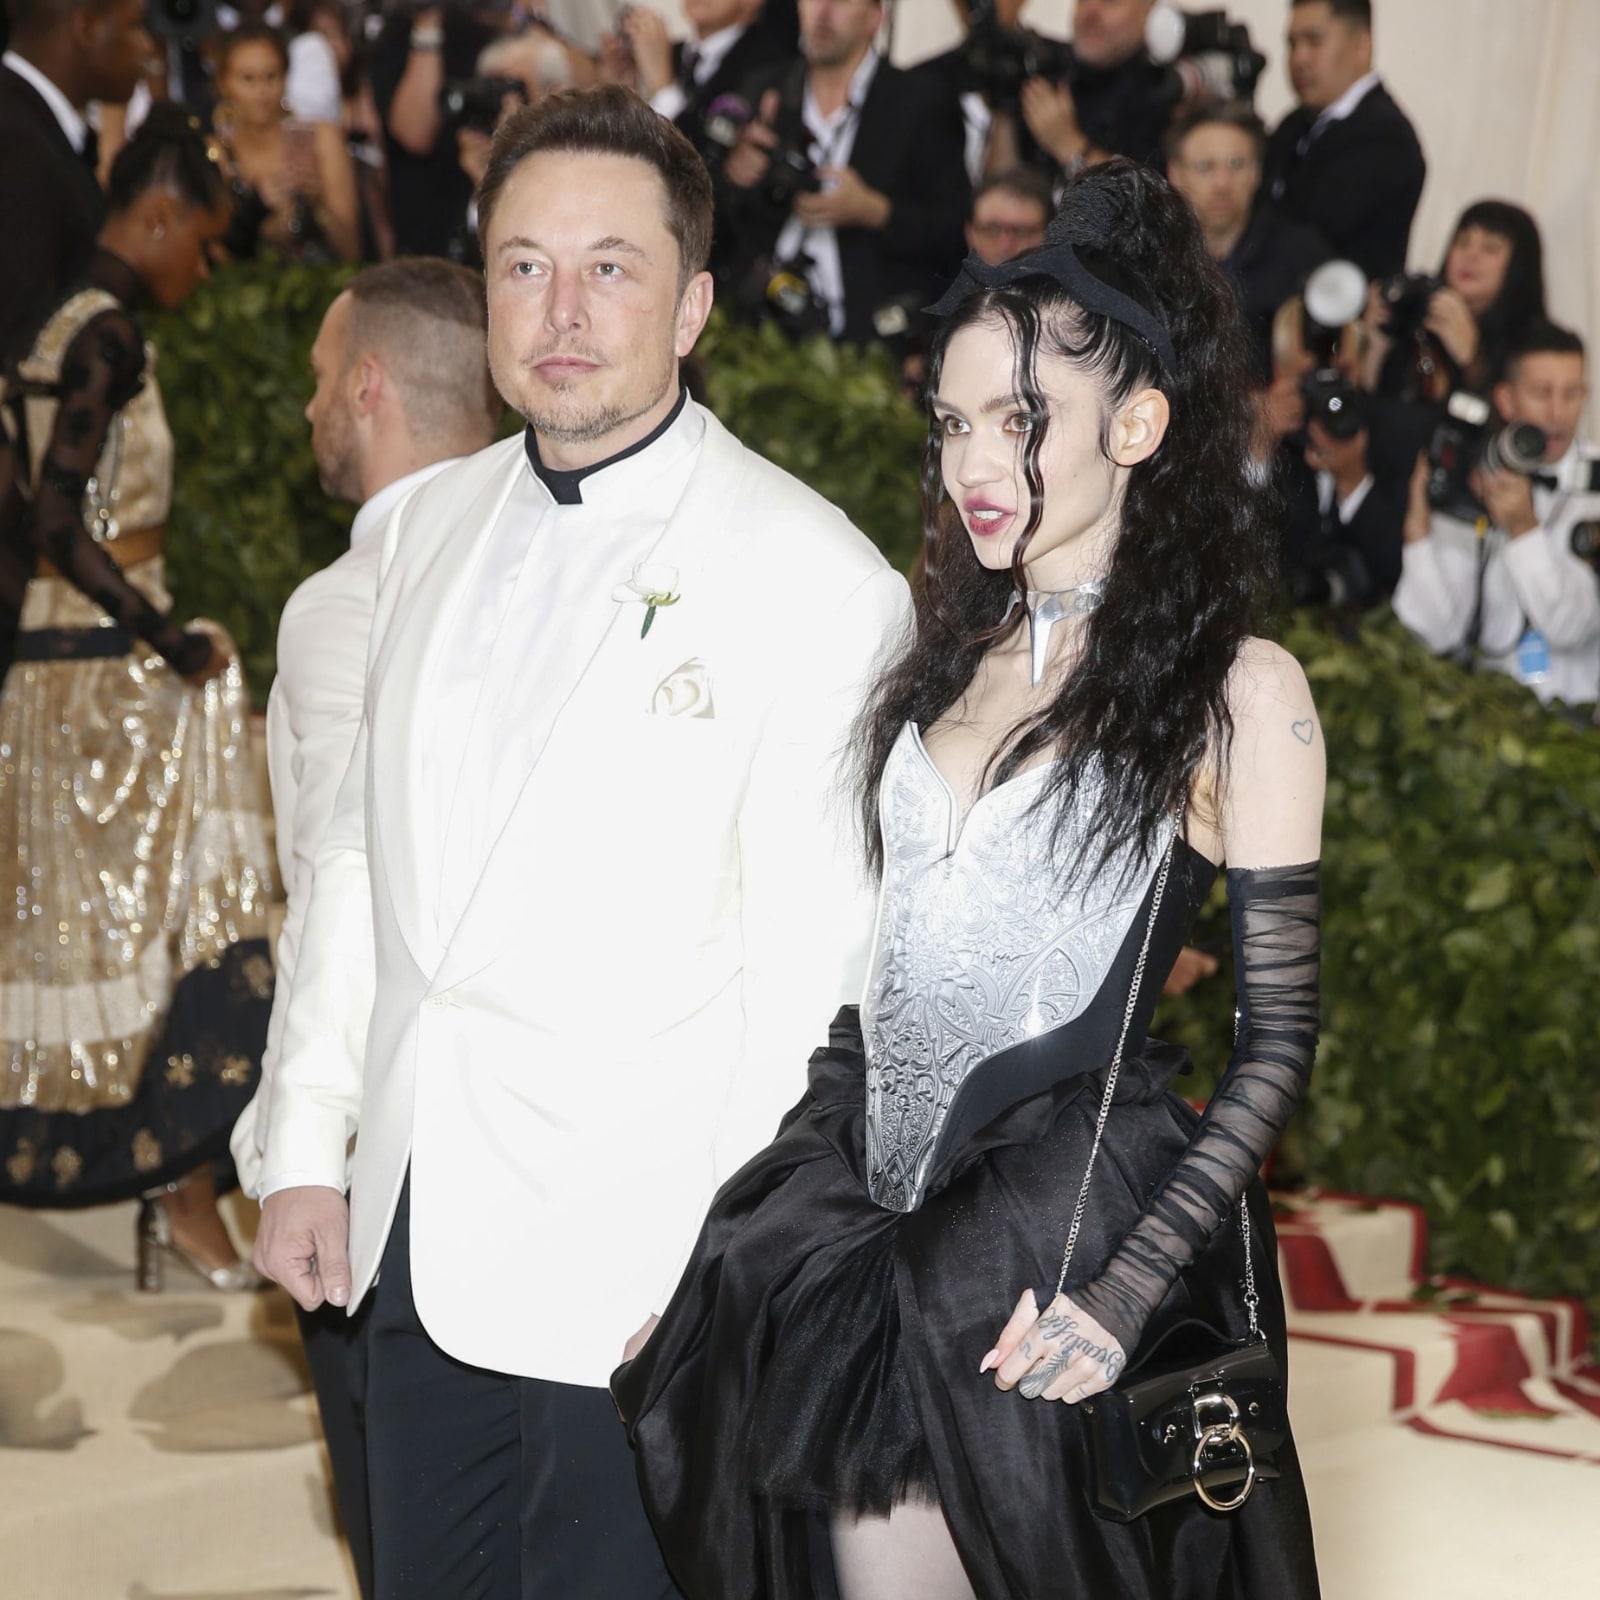 Grimes May Have Referenced Elon Musk Breakup In New Song